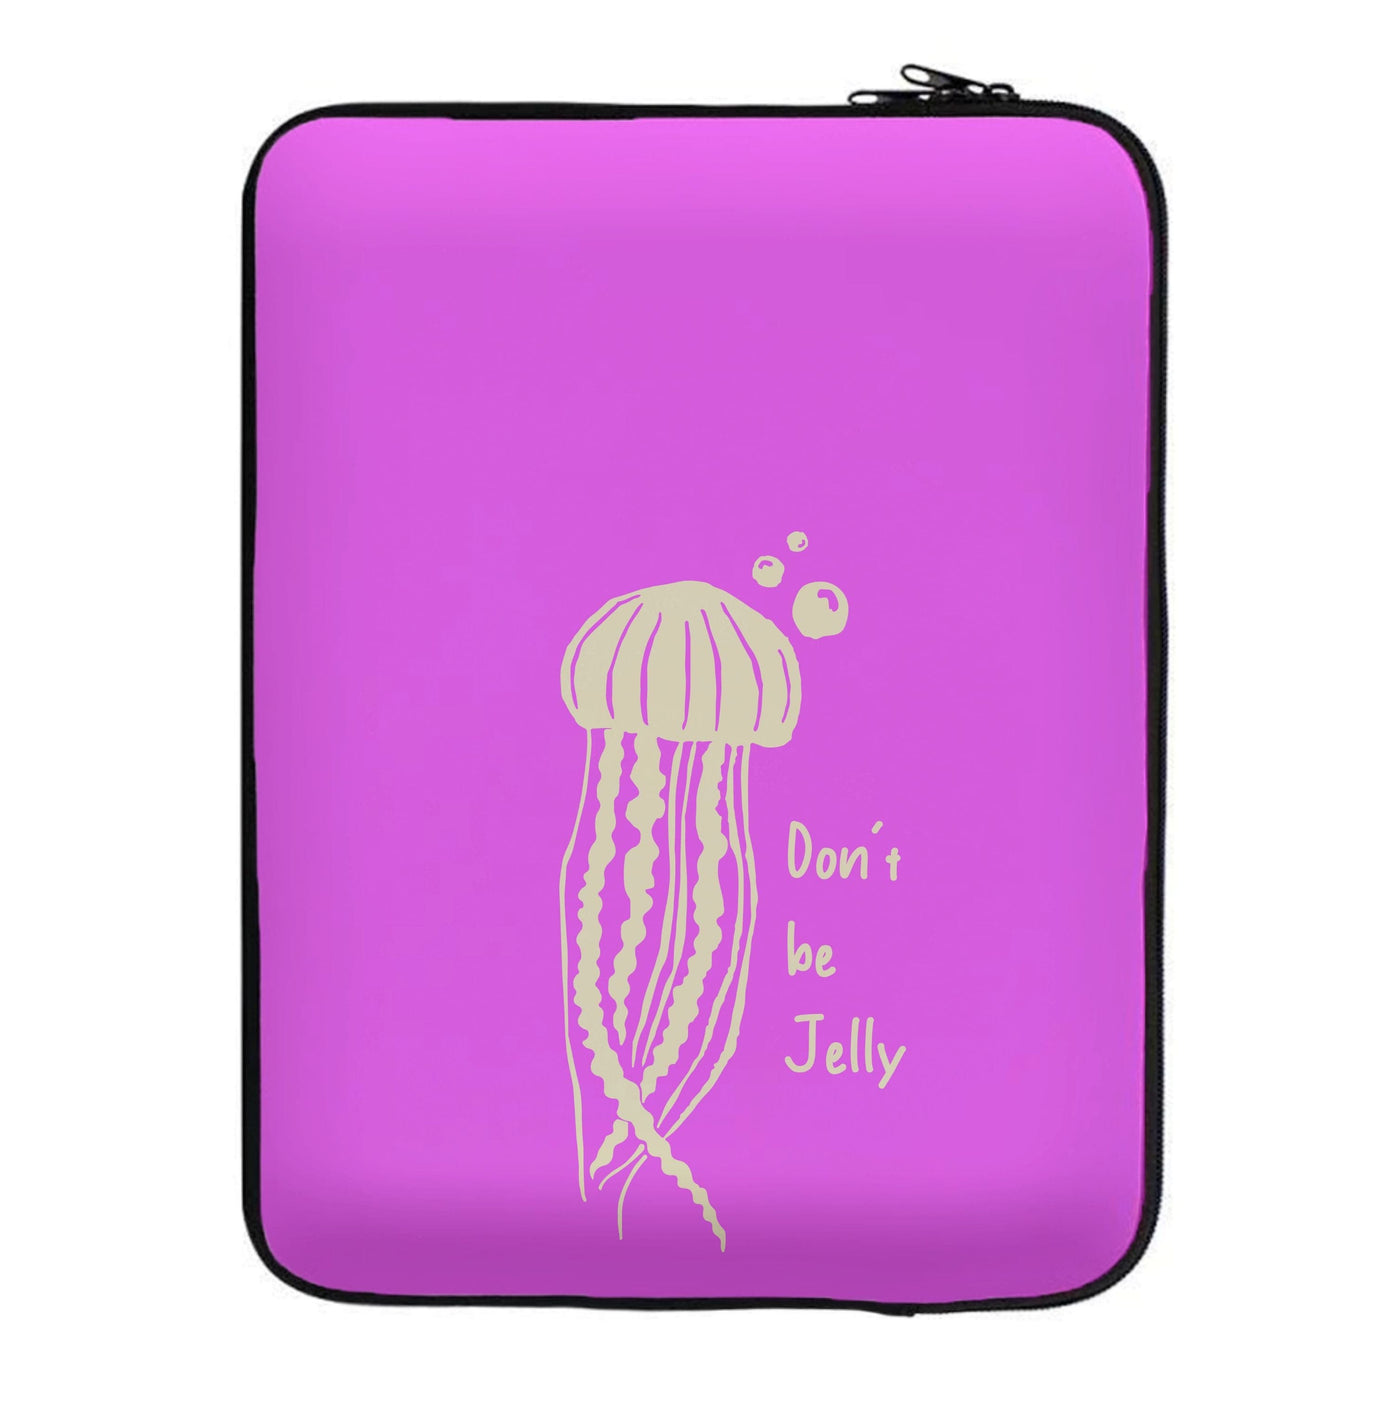 Don't Be Jelly - Sealife Laptop Sleeve